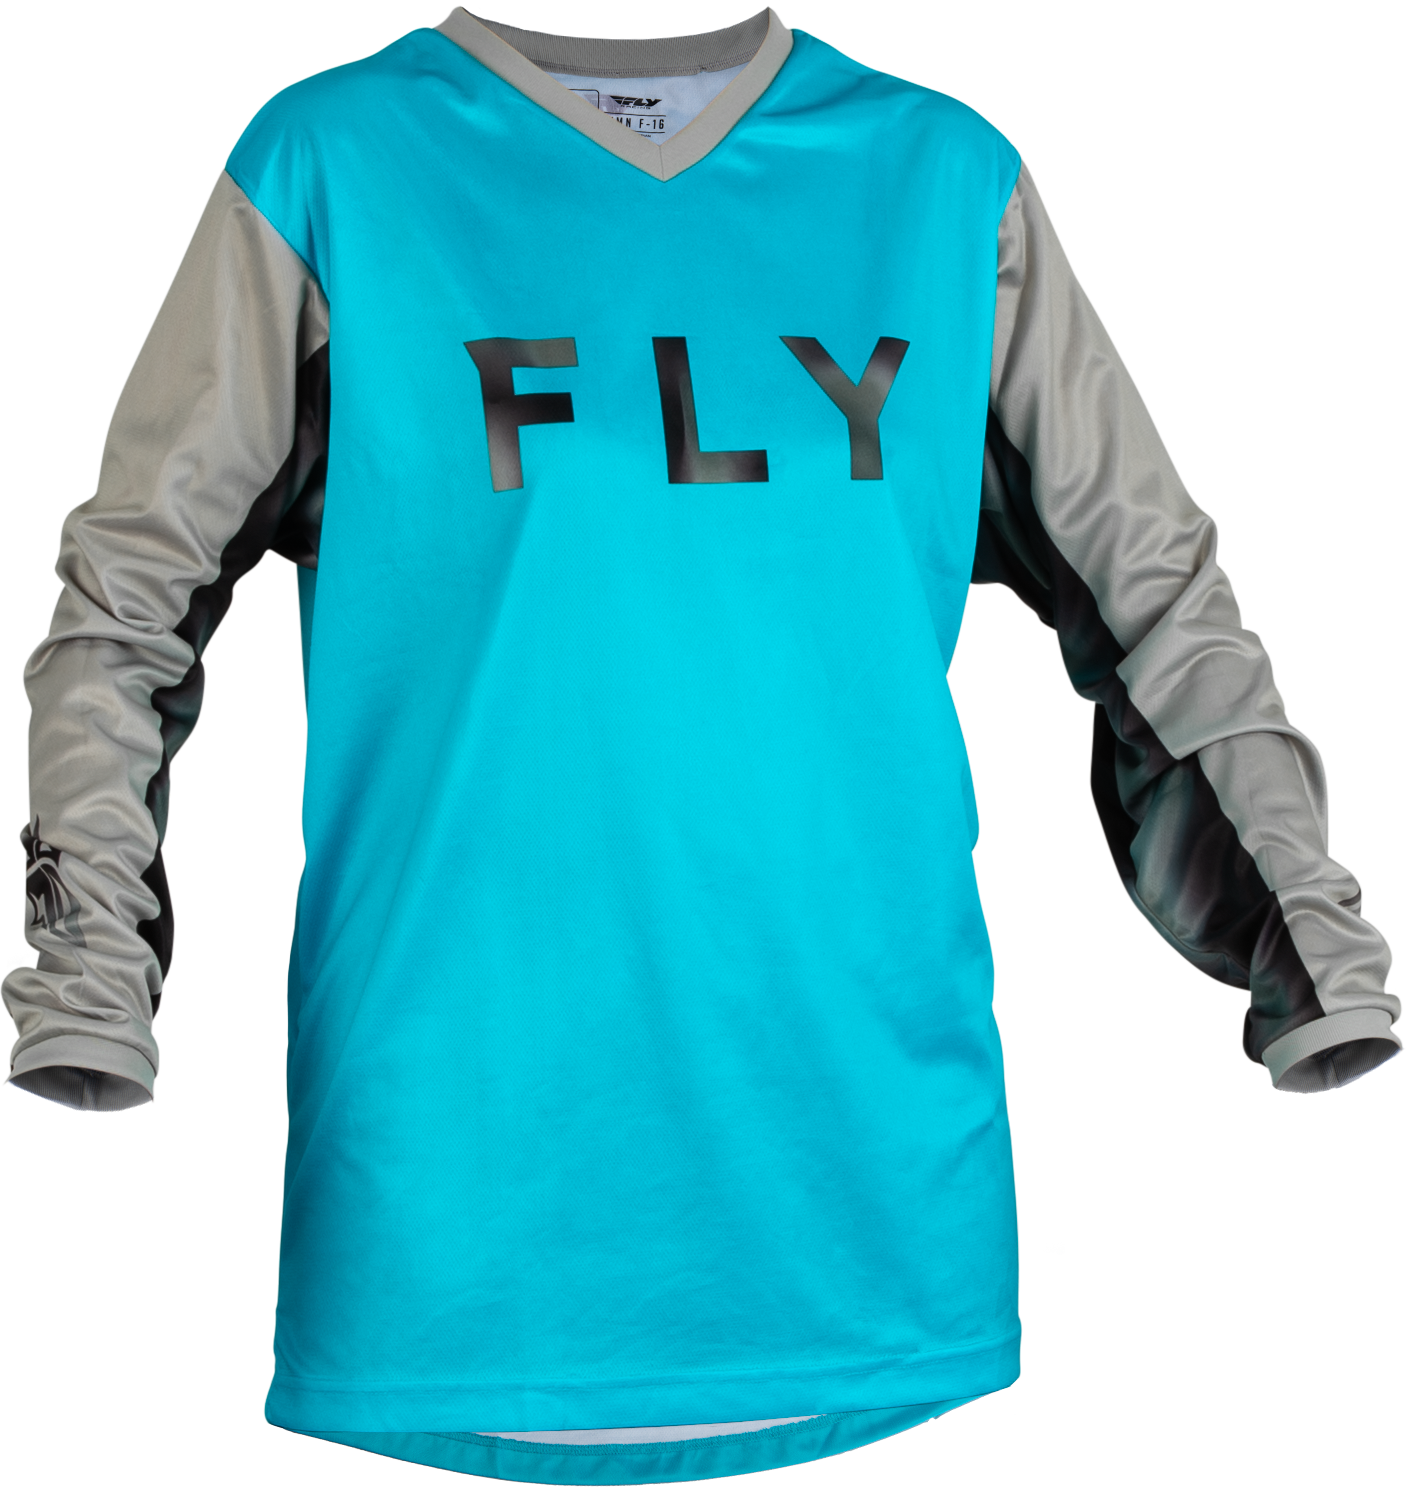 Fly Racing Adult Women's F-16 Jersey